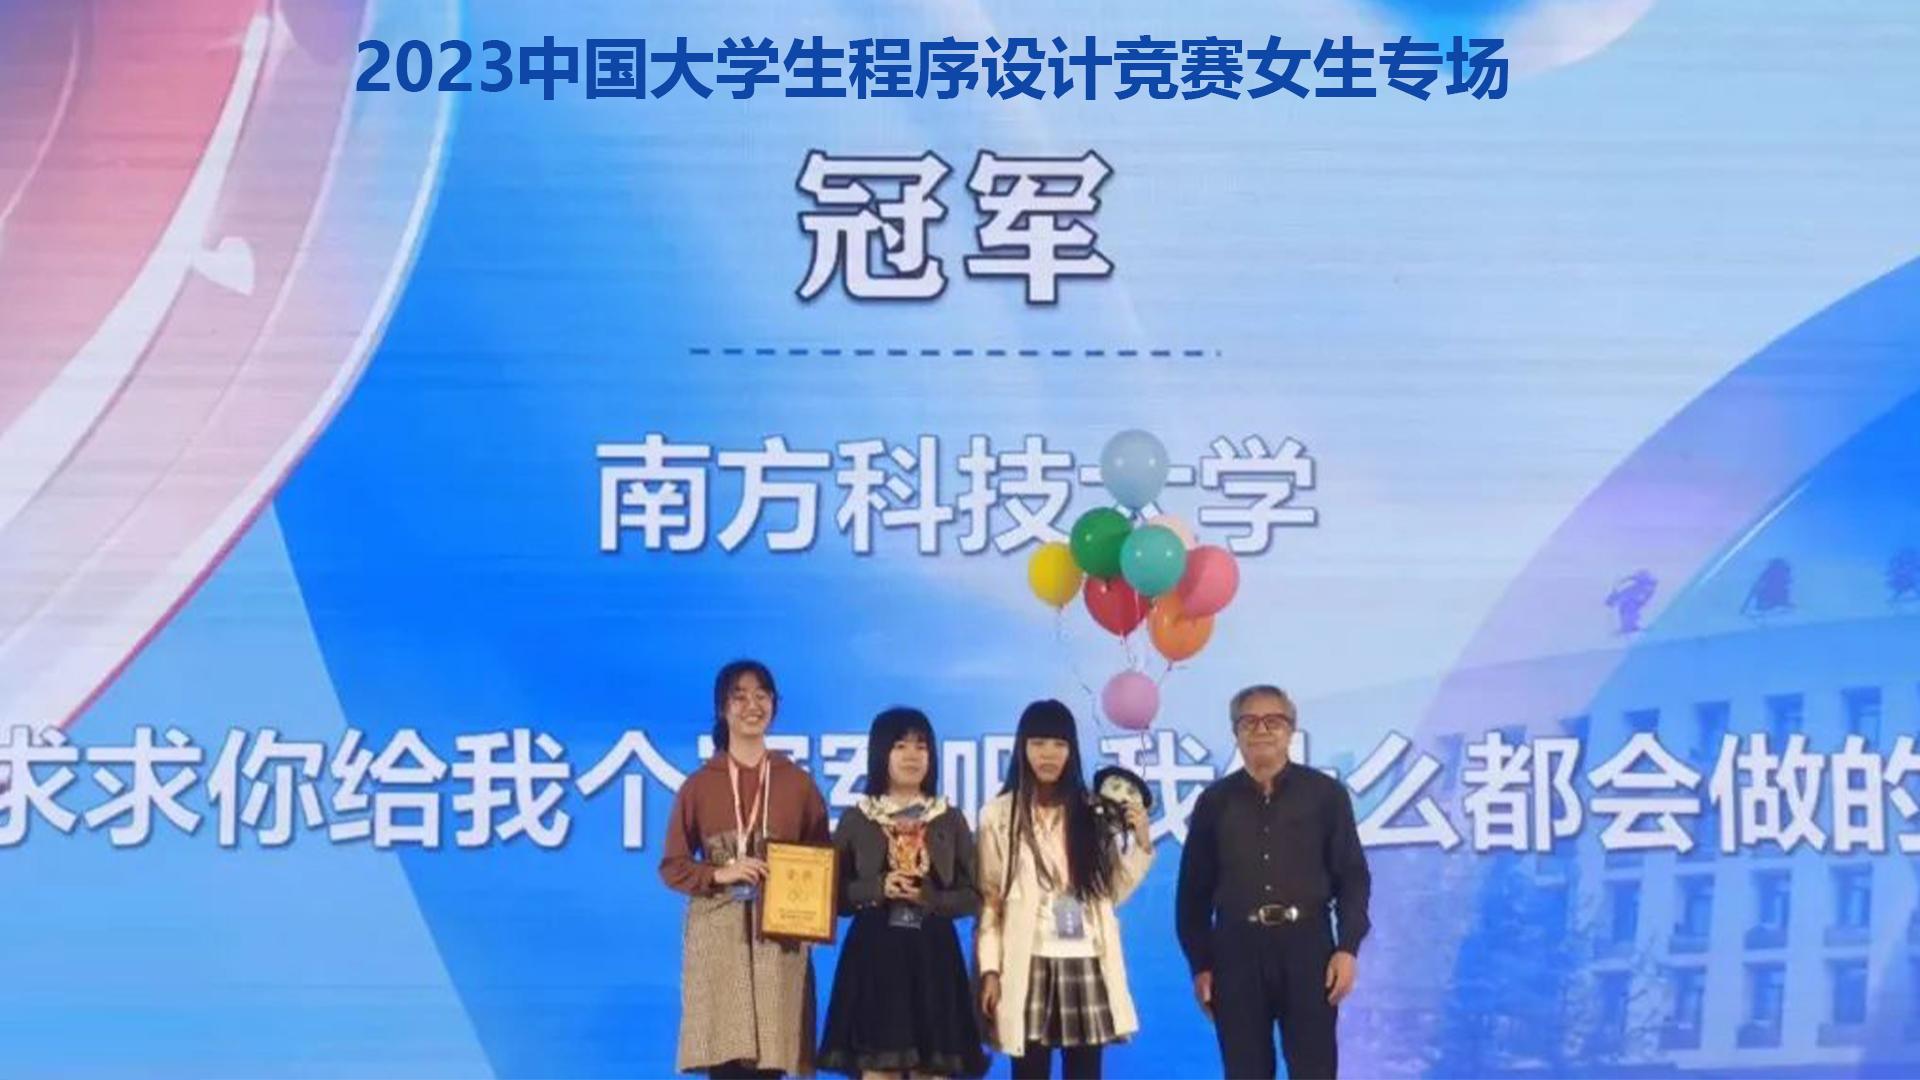 SUSTech students win multiple prizes at 2023 China Collegiate Programming Contest